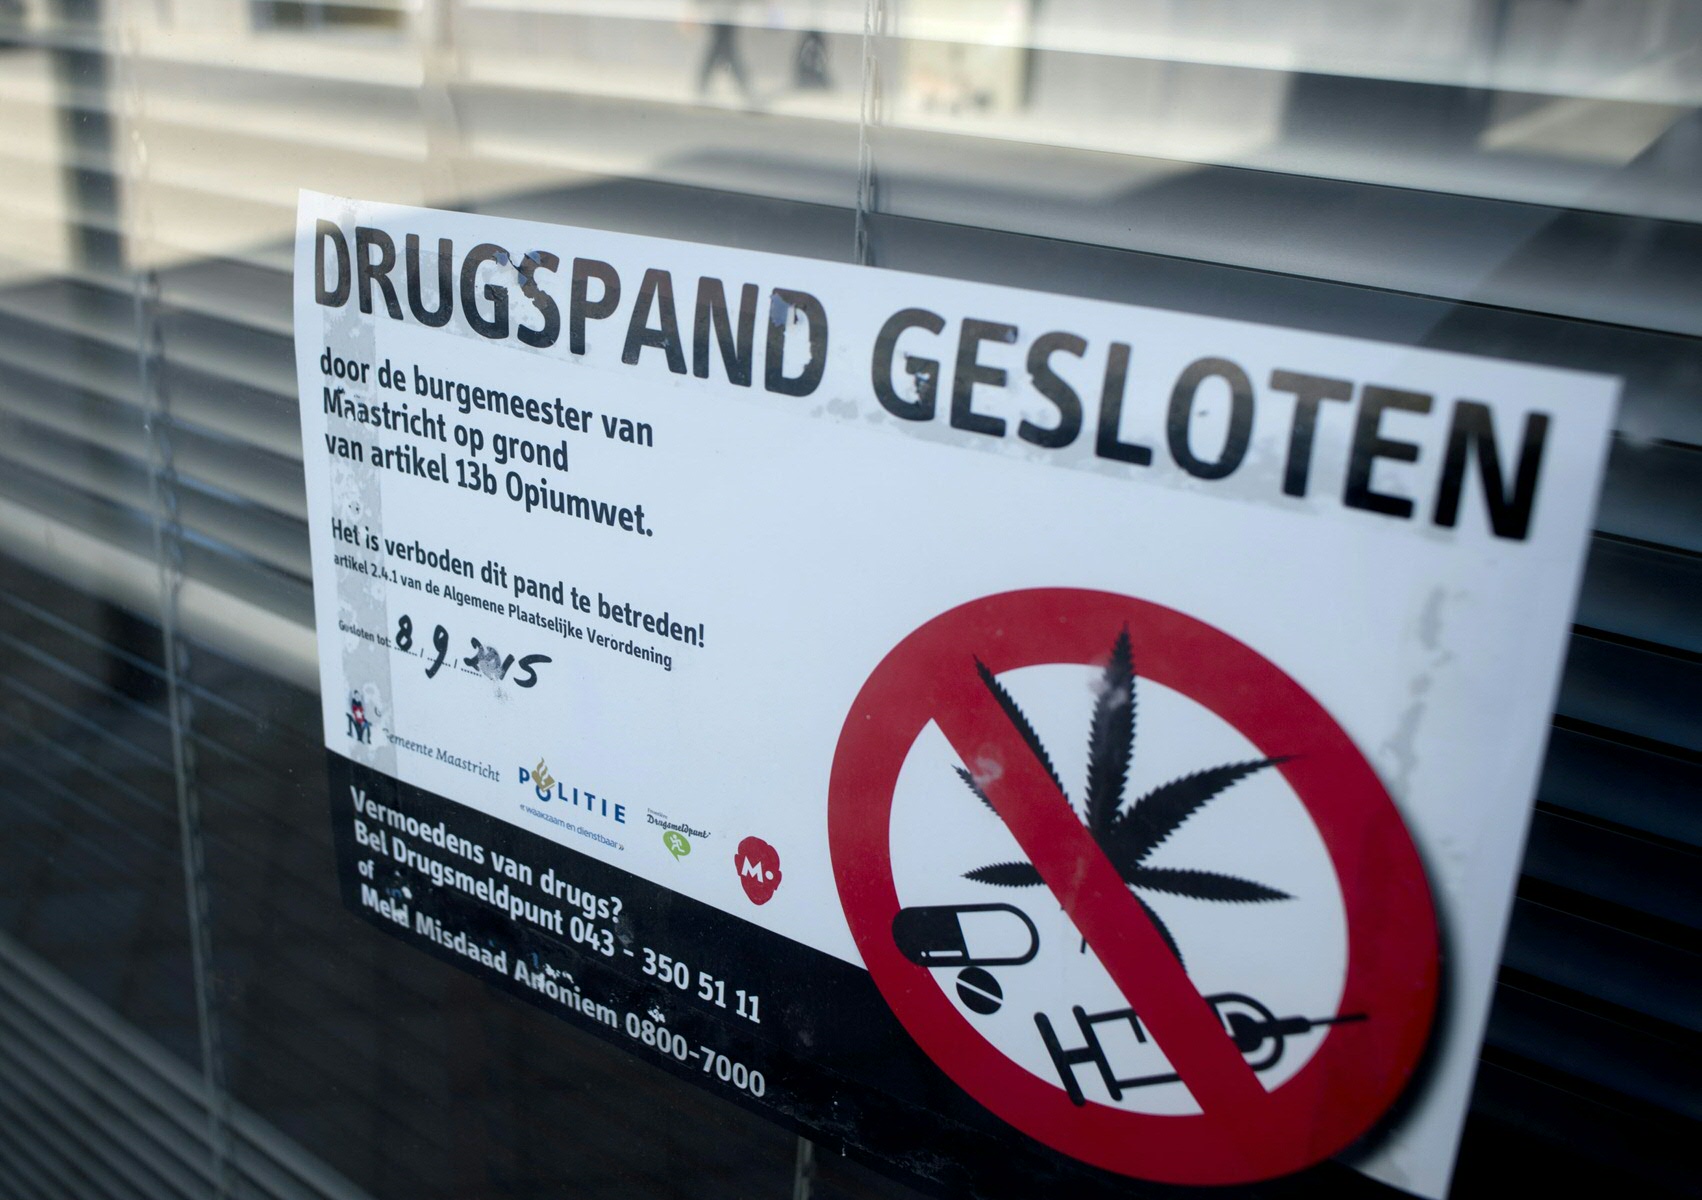 A closed drug house. Drugs producers do not only face legal sanctions, but may also lose their homes through closure or eviction. (Photo: Fotoburo Twan Wiermans/Nationale Beeldbank)